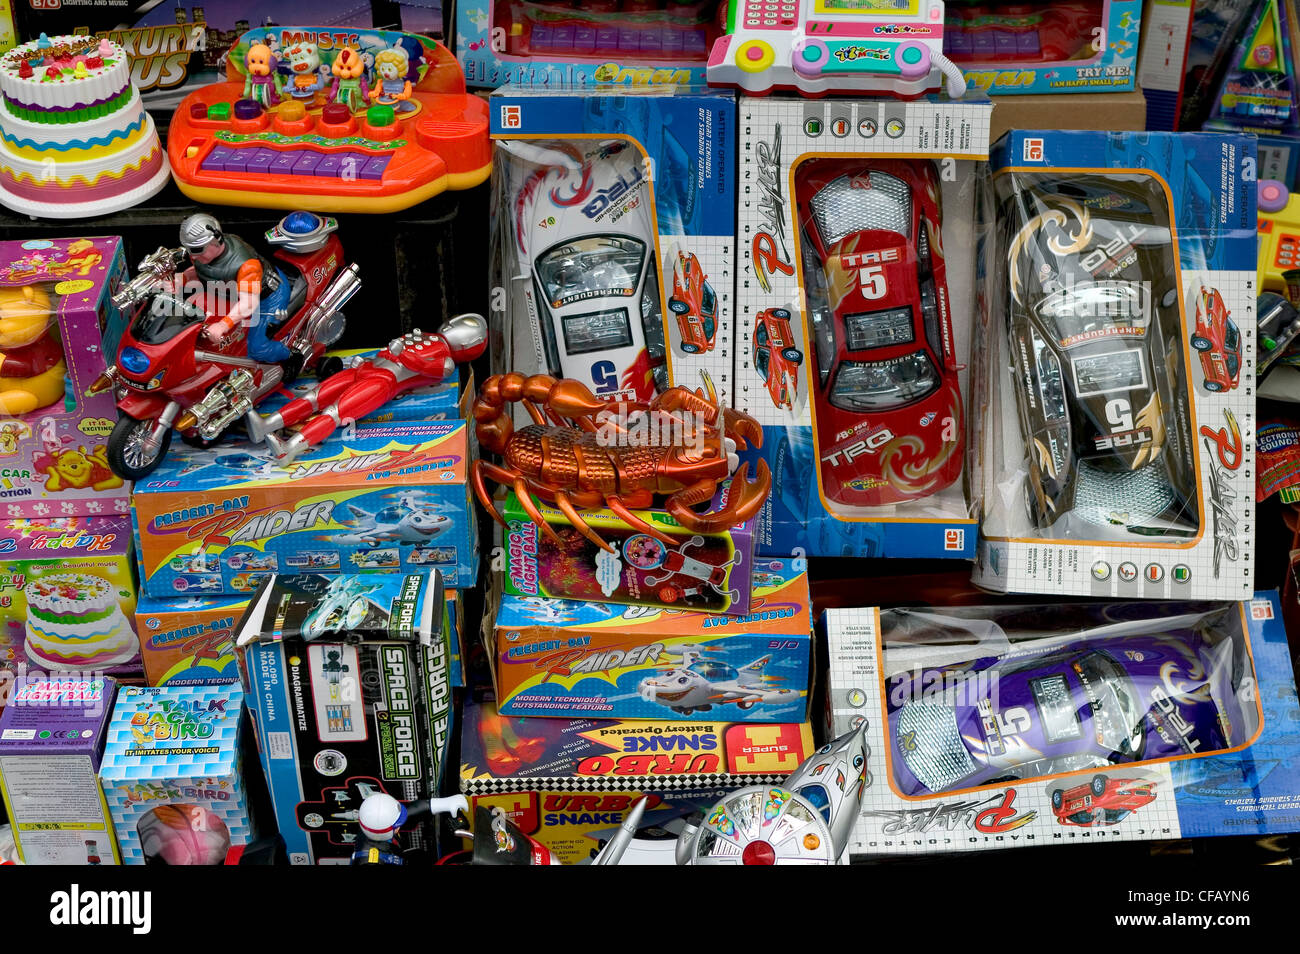 Toys in London Market stall. Stock Photo